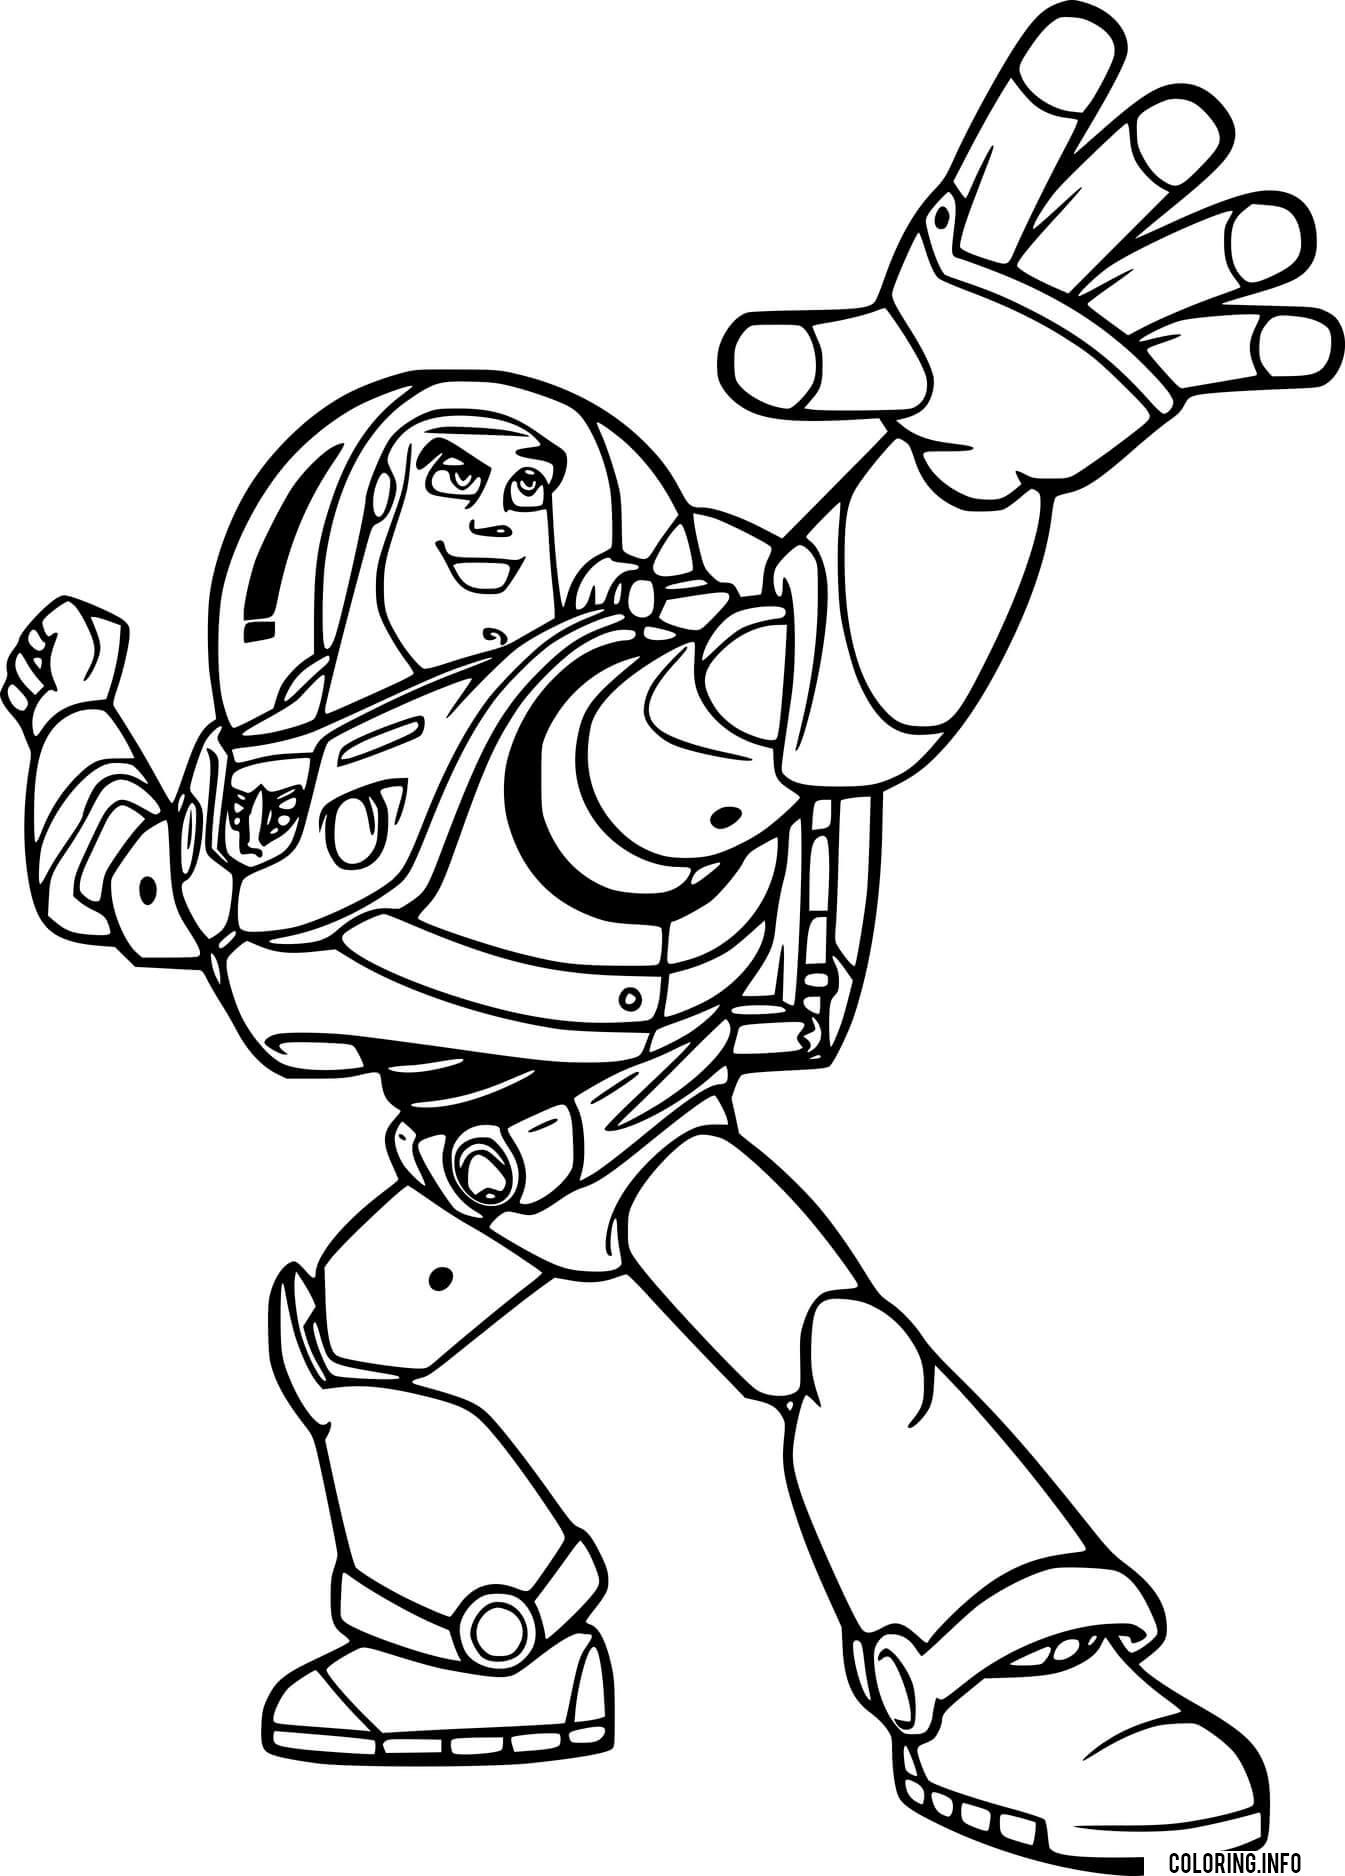 Buzz Lightyear Spreads Hand coloring